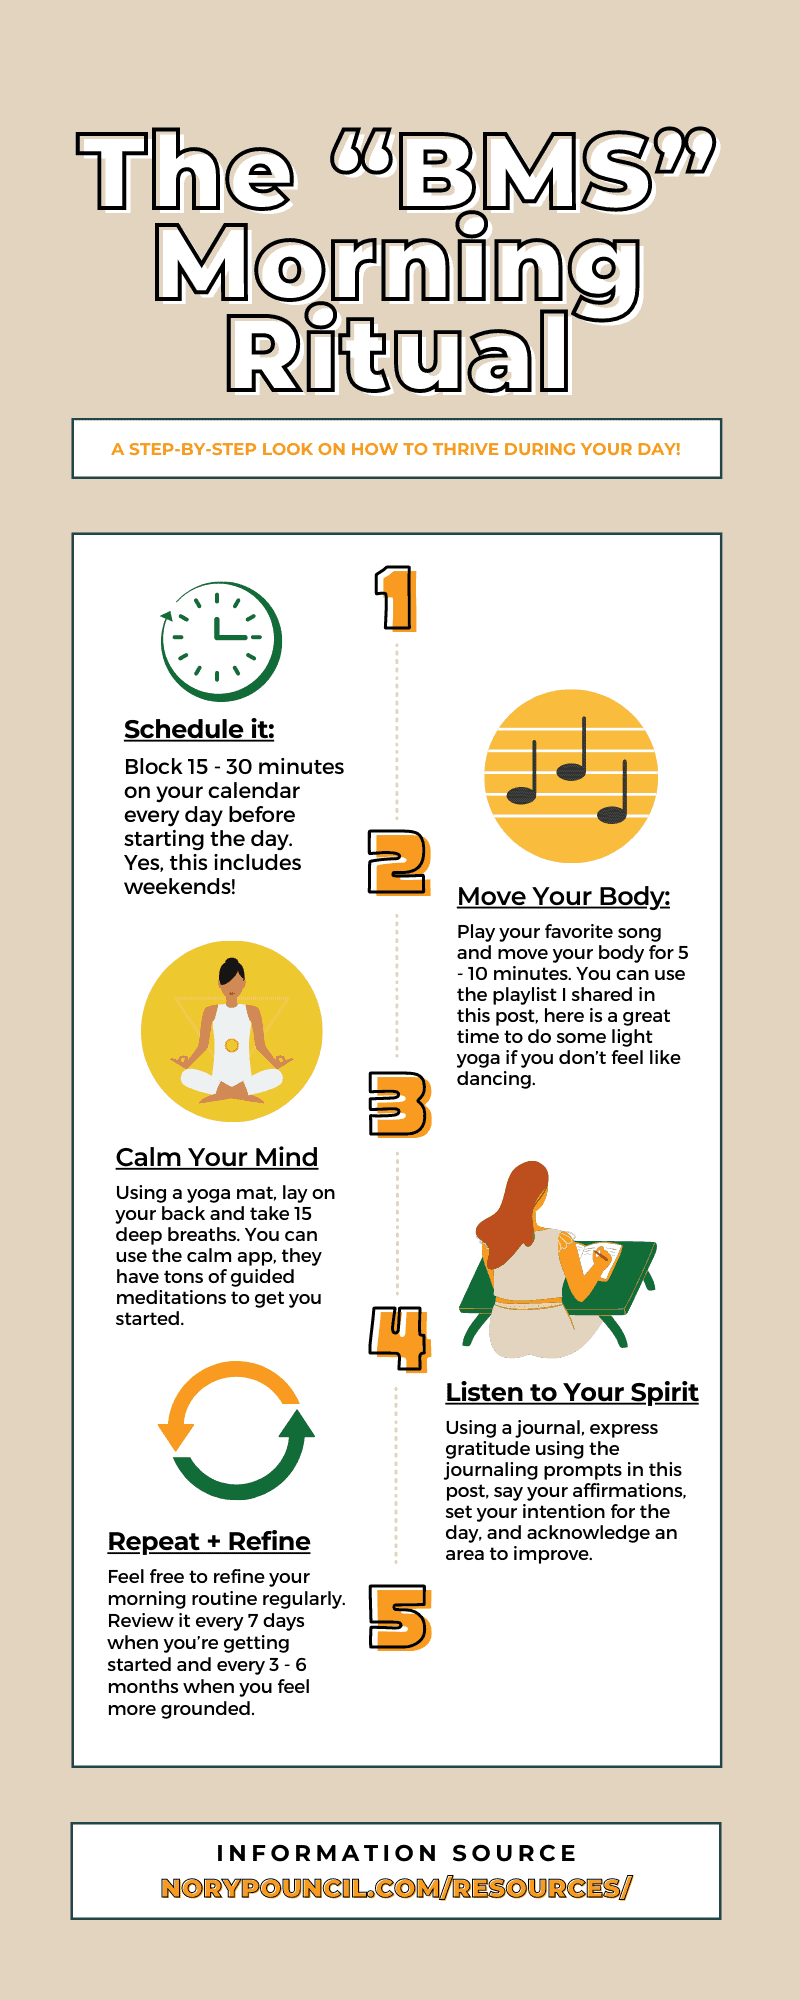 A step-by-step look on how to thrive during your day - infographic